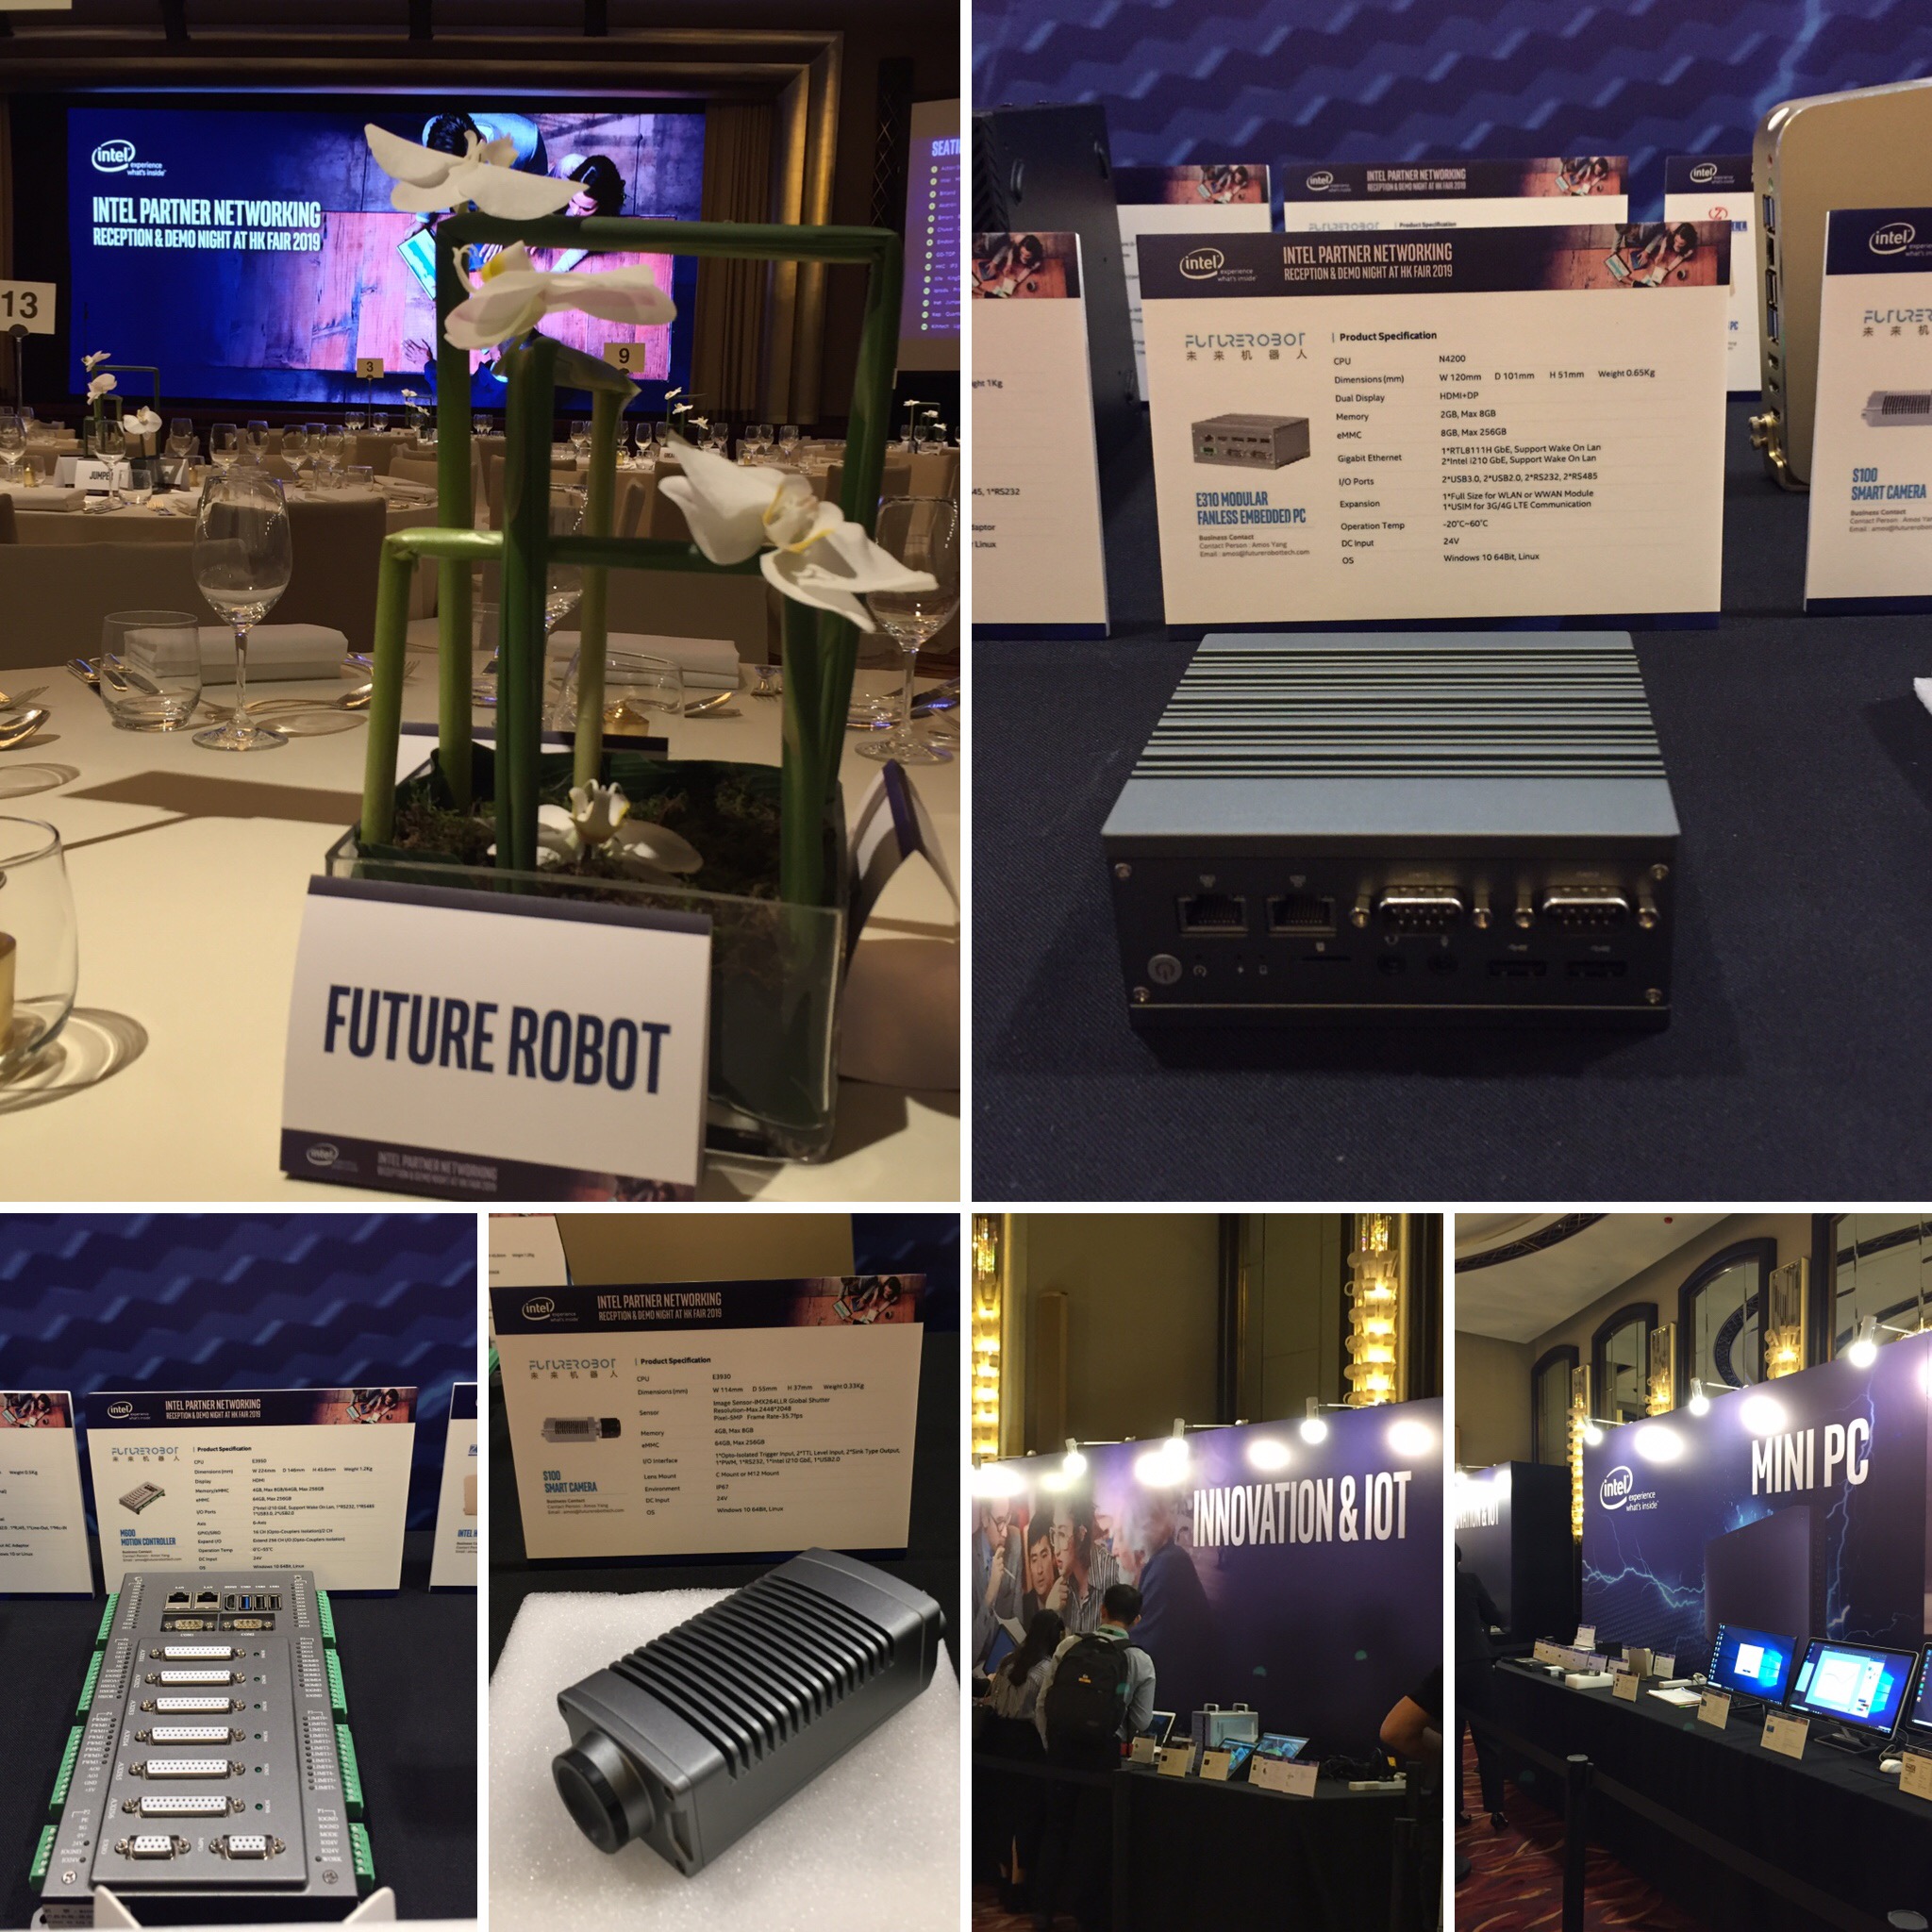 Future Robot Technology Co., Limited Innovation & IoT and MINI PC demo showcase